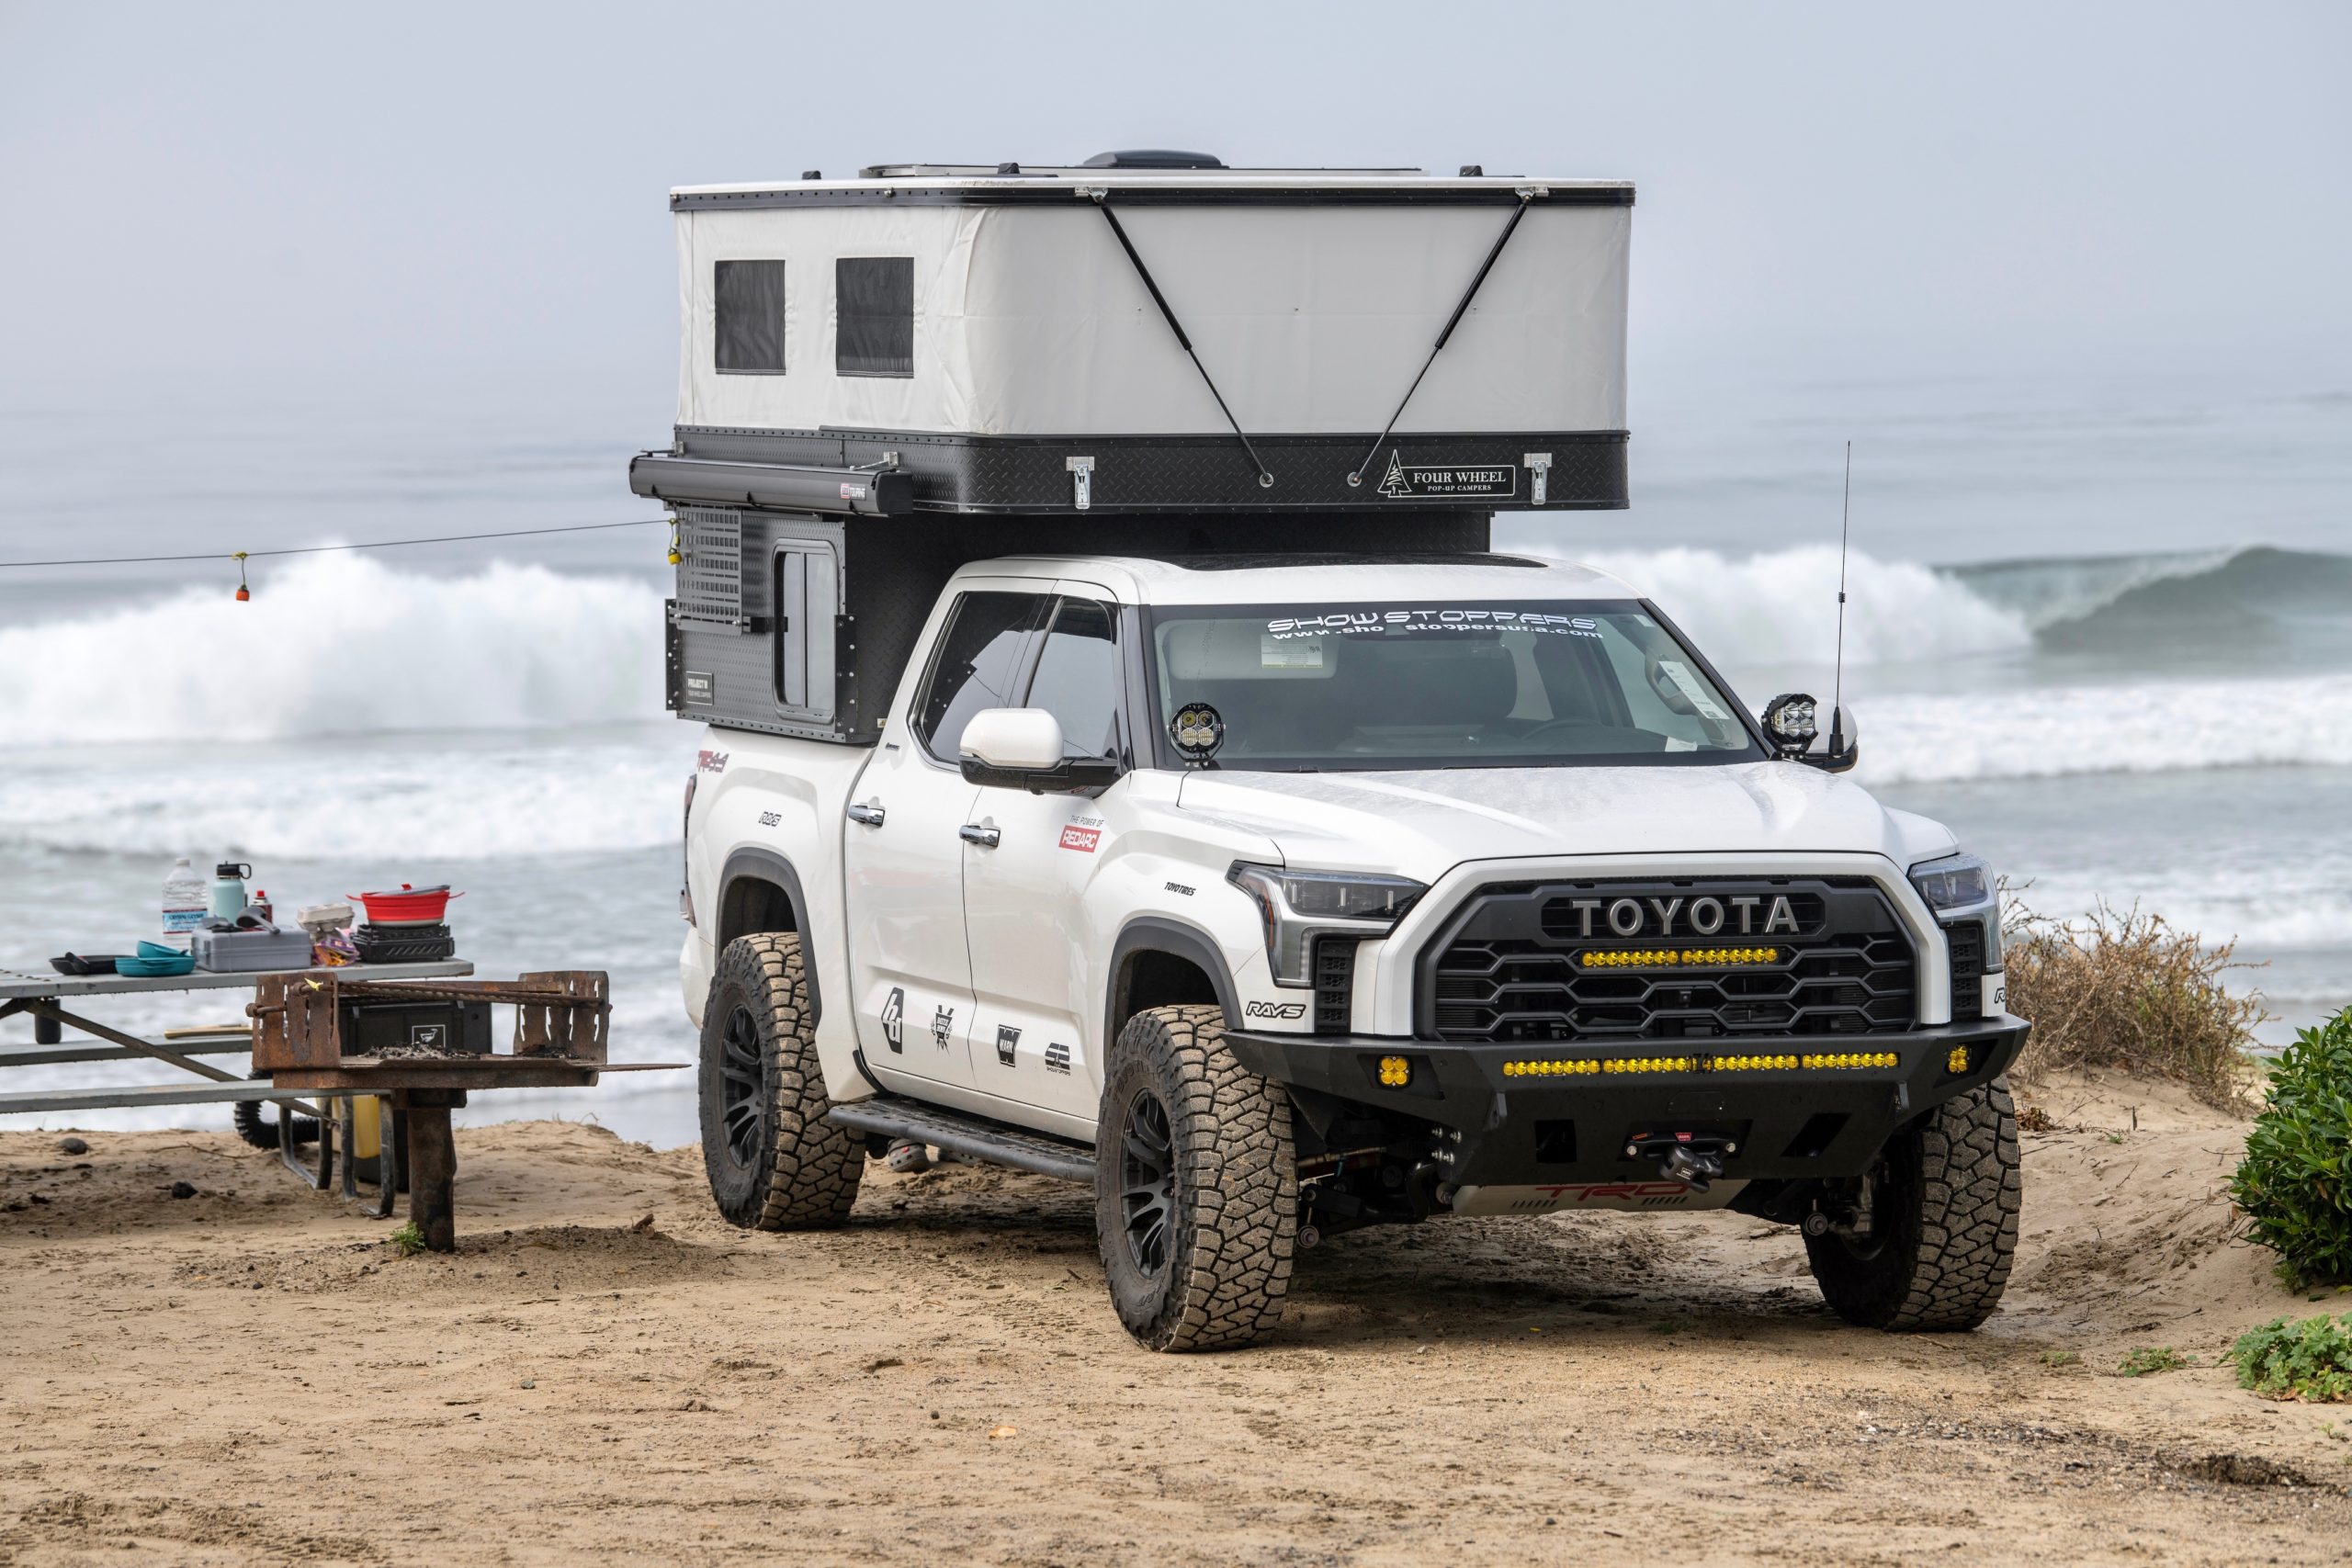 Sponsored By Wifey Truck Camper Camping on the Beach at the Ocean